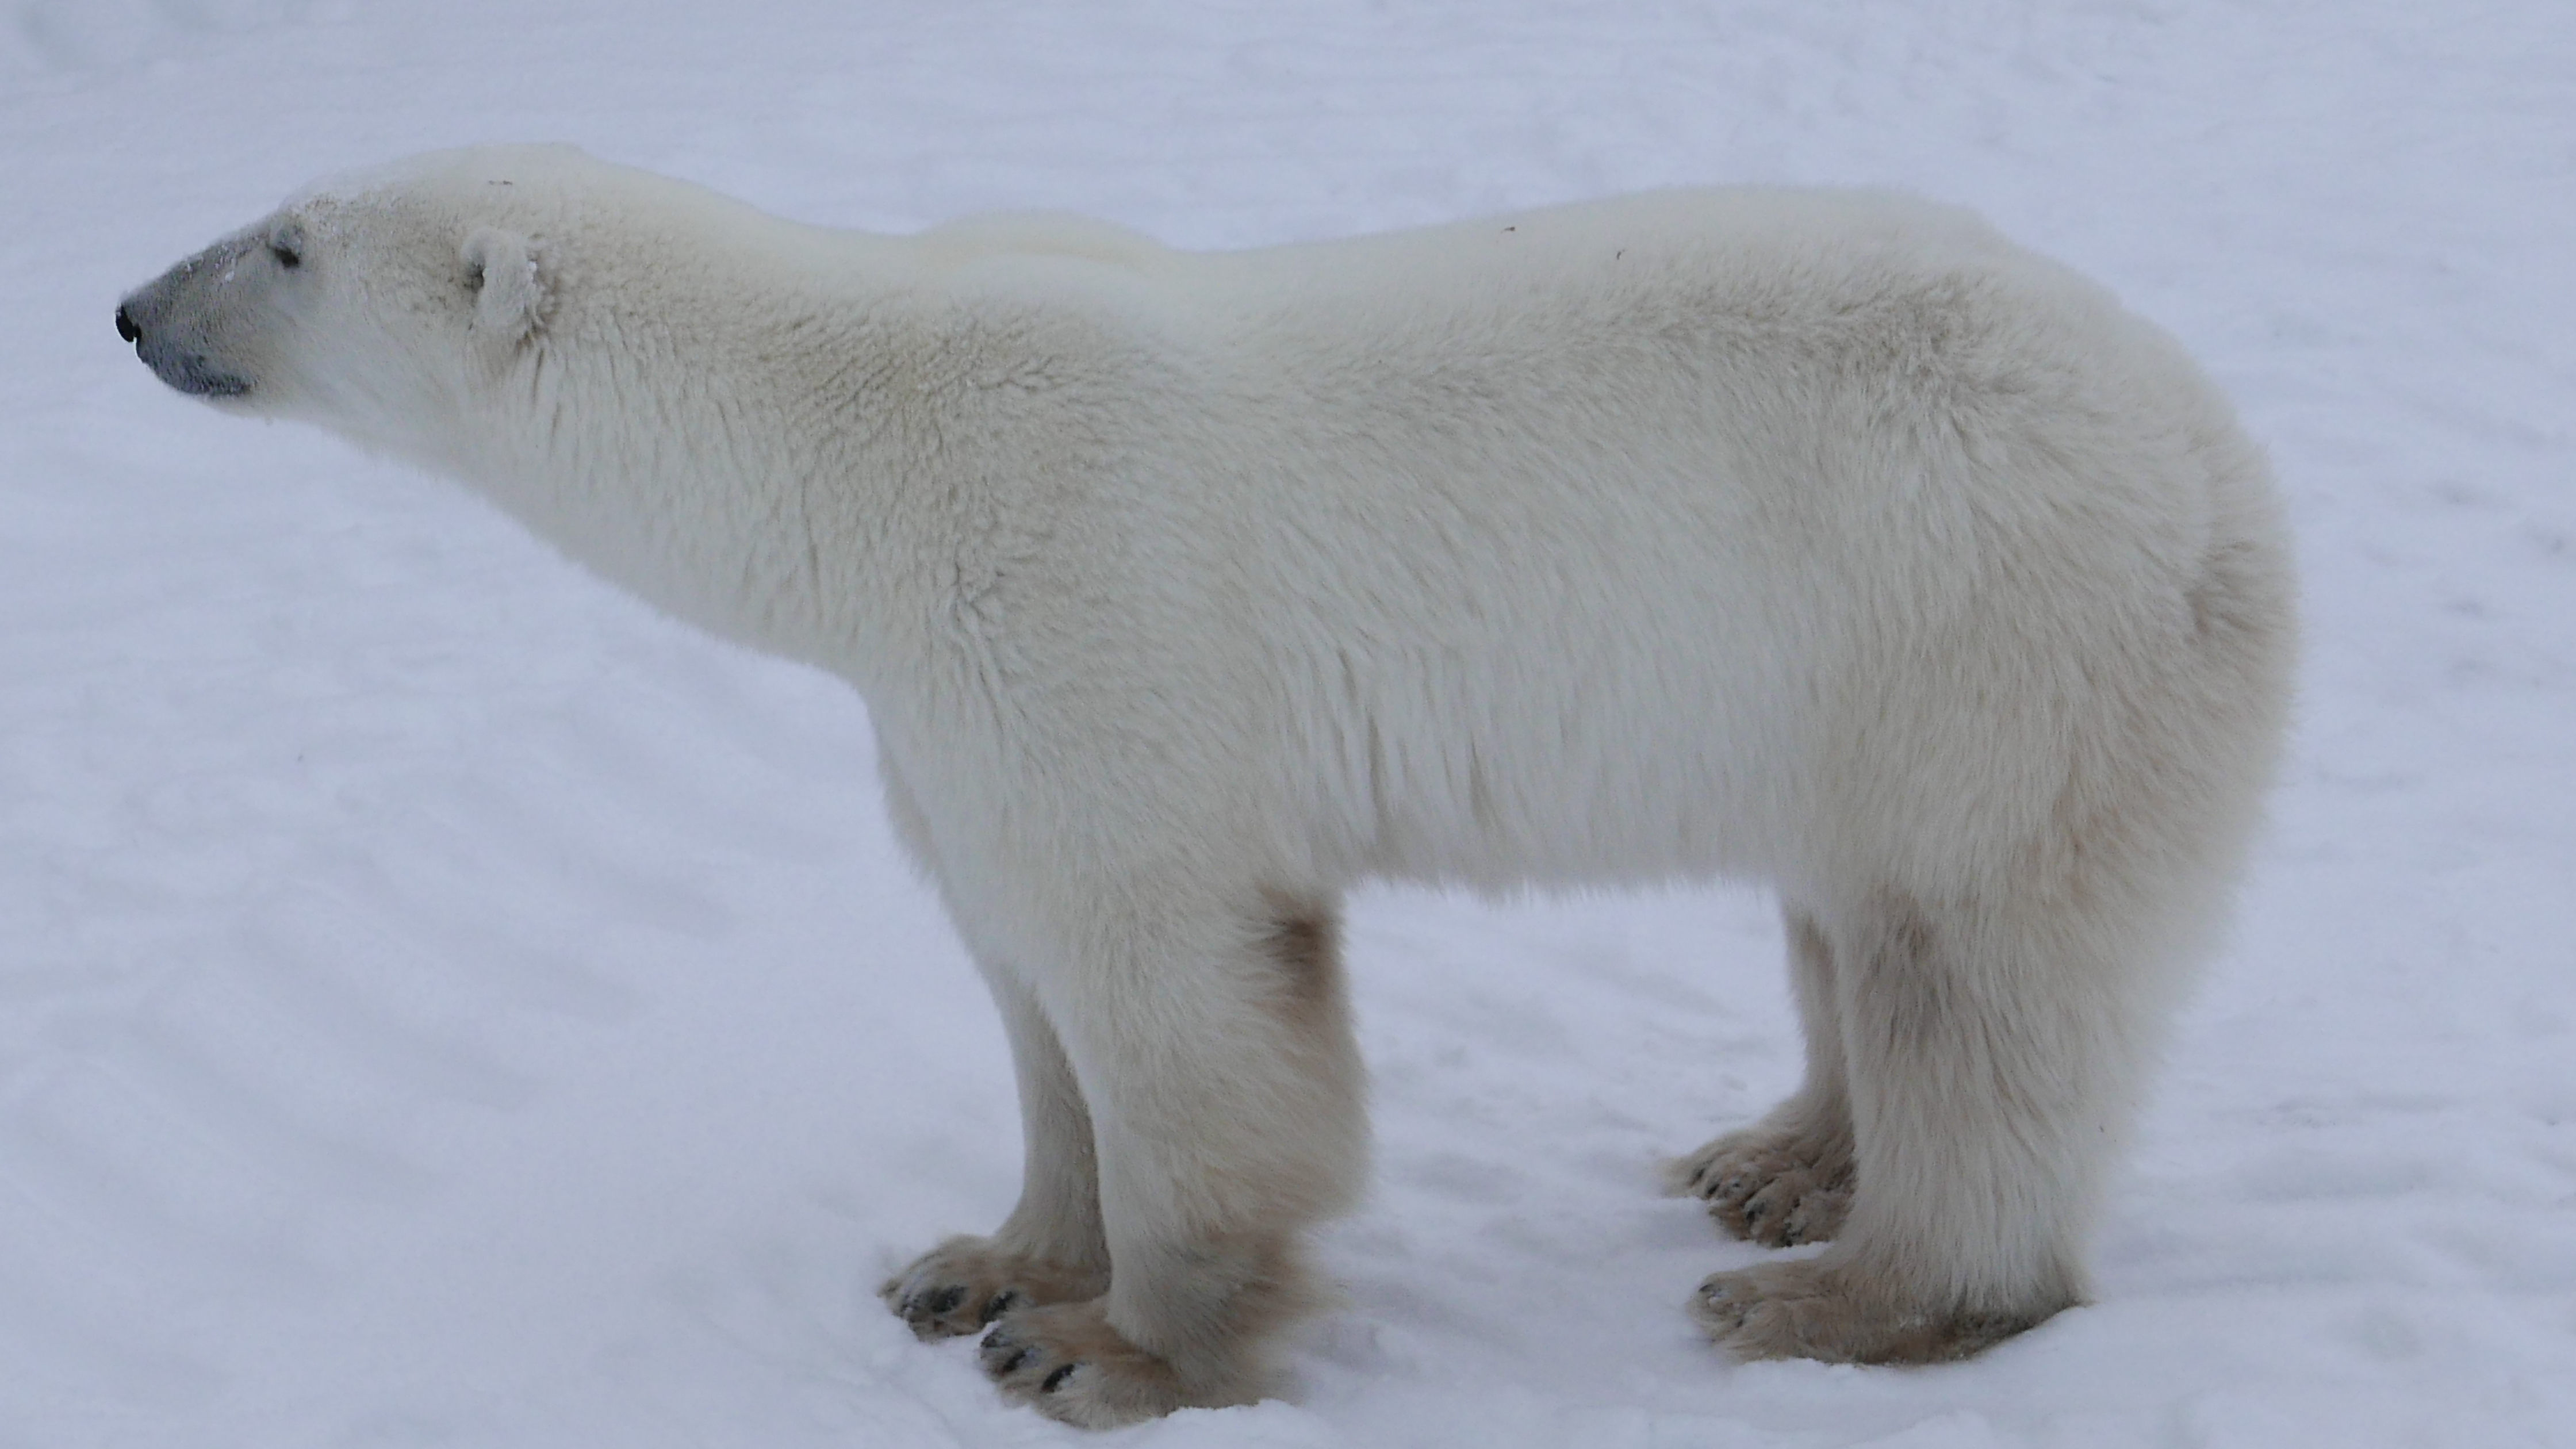 Climate Change Makes Polar Bears Work Harder to Survive by Megan Owen